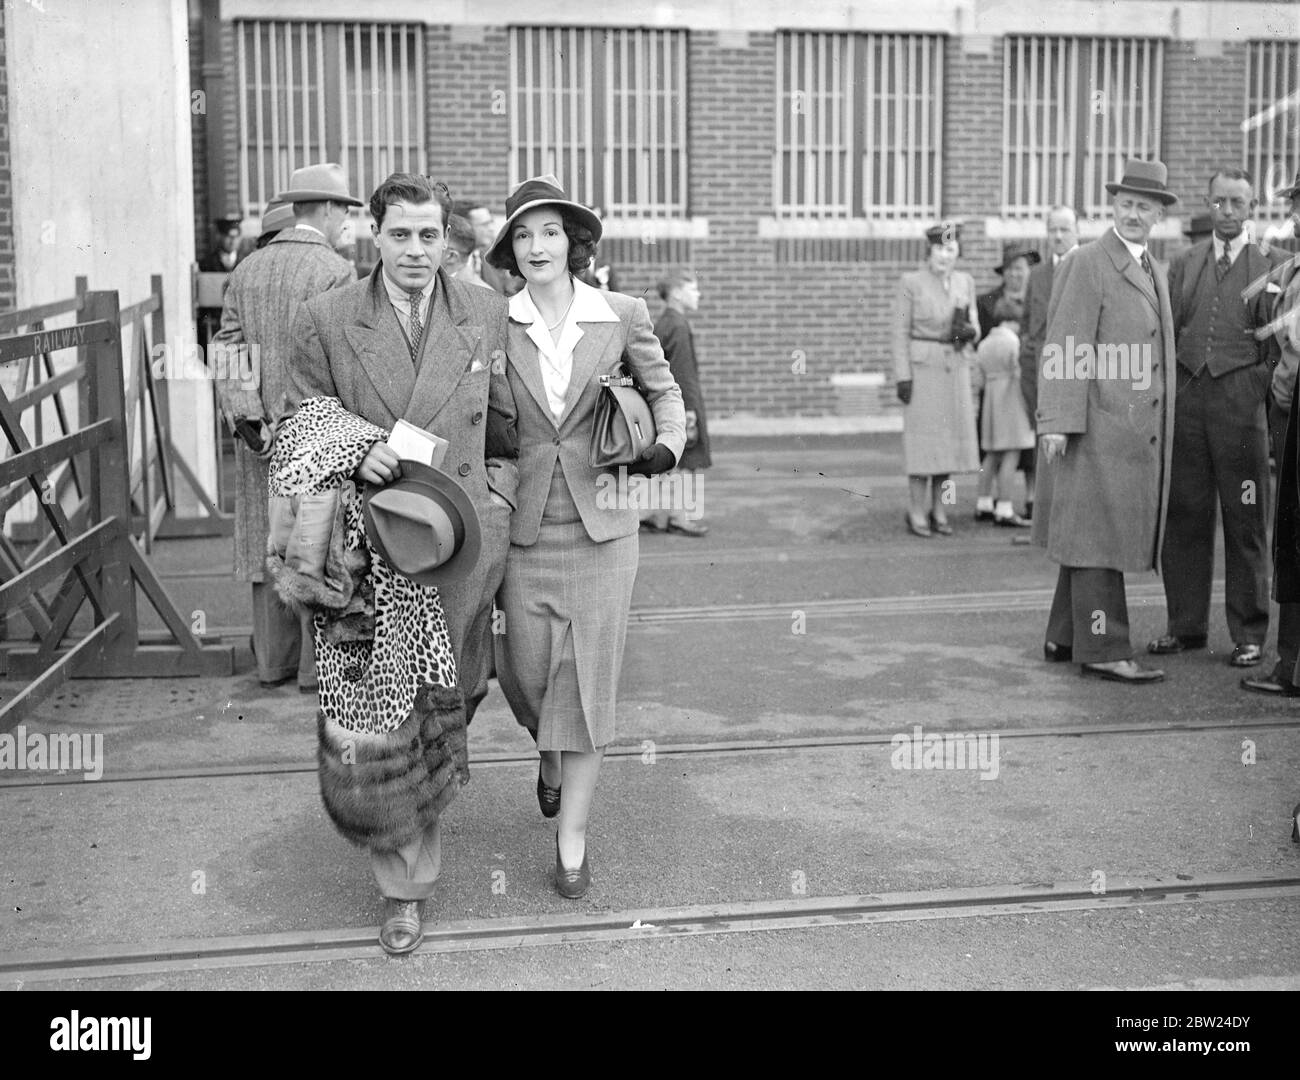 Film 'gangster' meets his bride at Southampton. Jack la Rus, the American film and stage actor, well-known phrase gangster roles, went down to Southampton to meet it bride to be, Constance Dighton Simpson, when she arrived on the 'Normandie' from America. 19 September 1938 Stock Photo